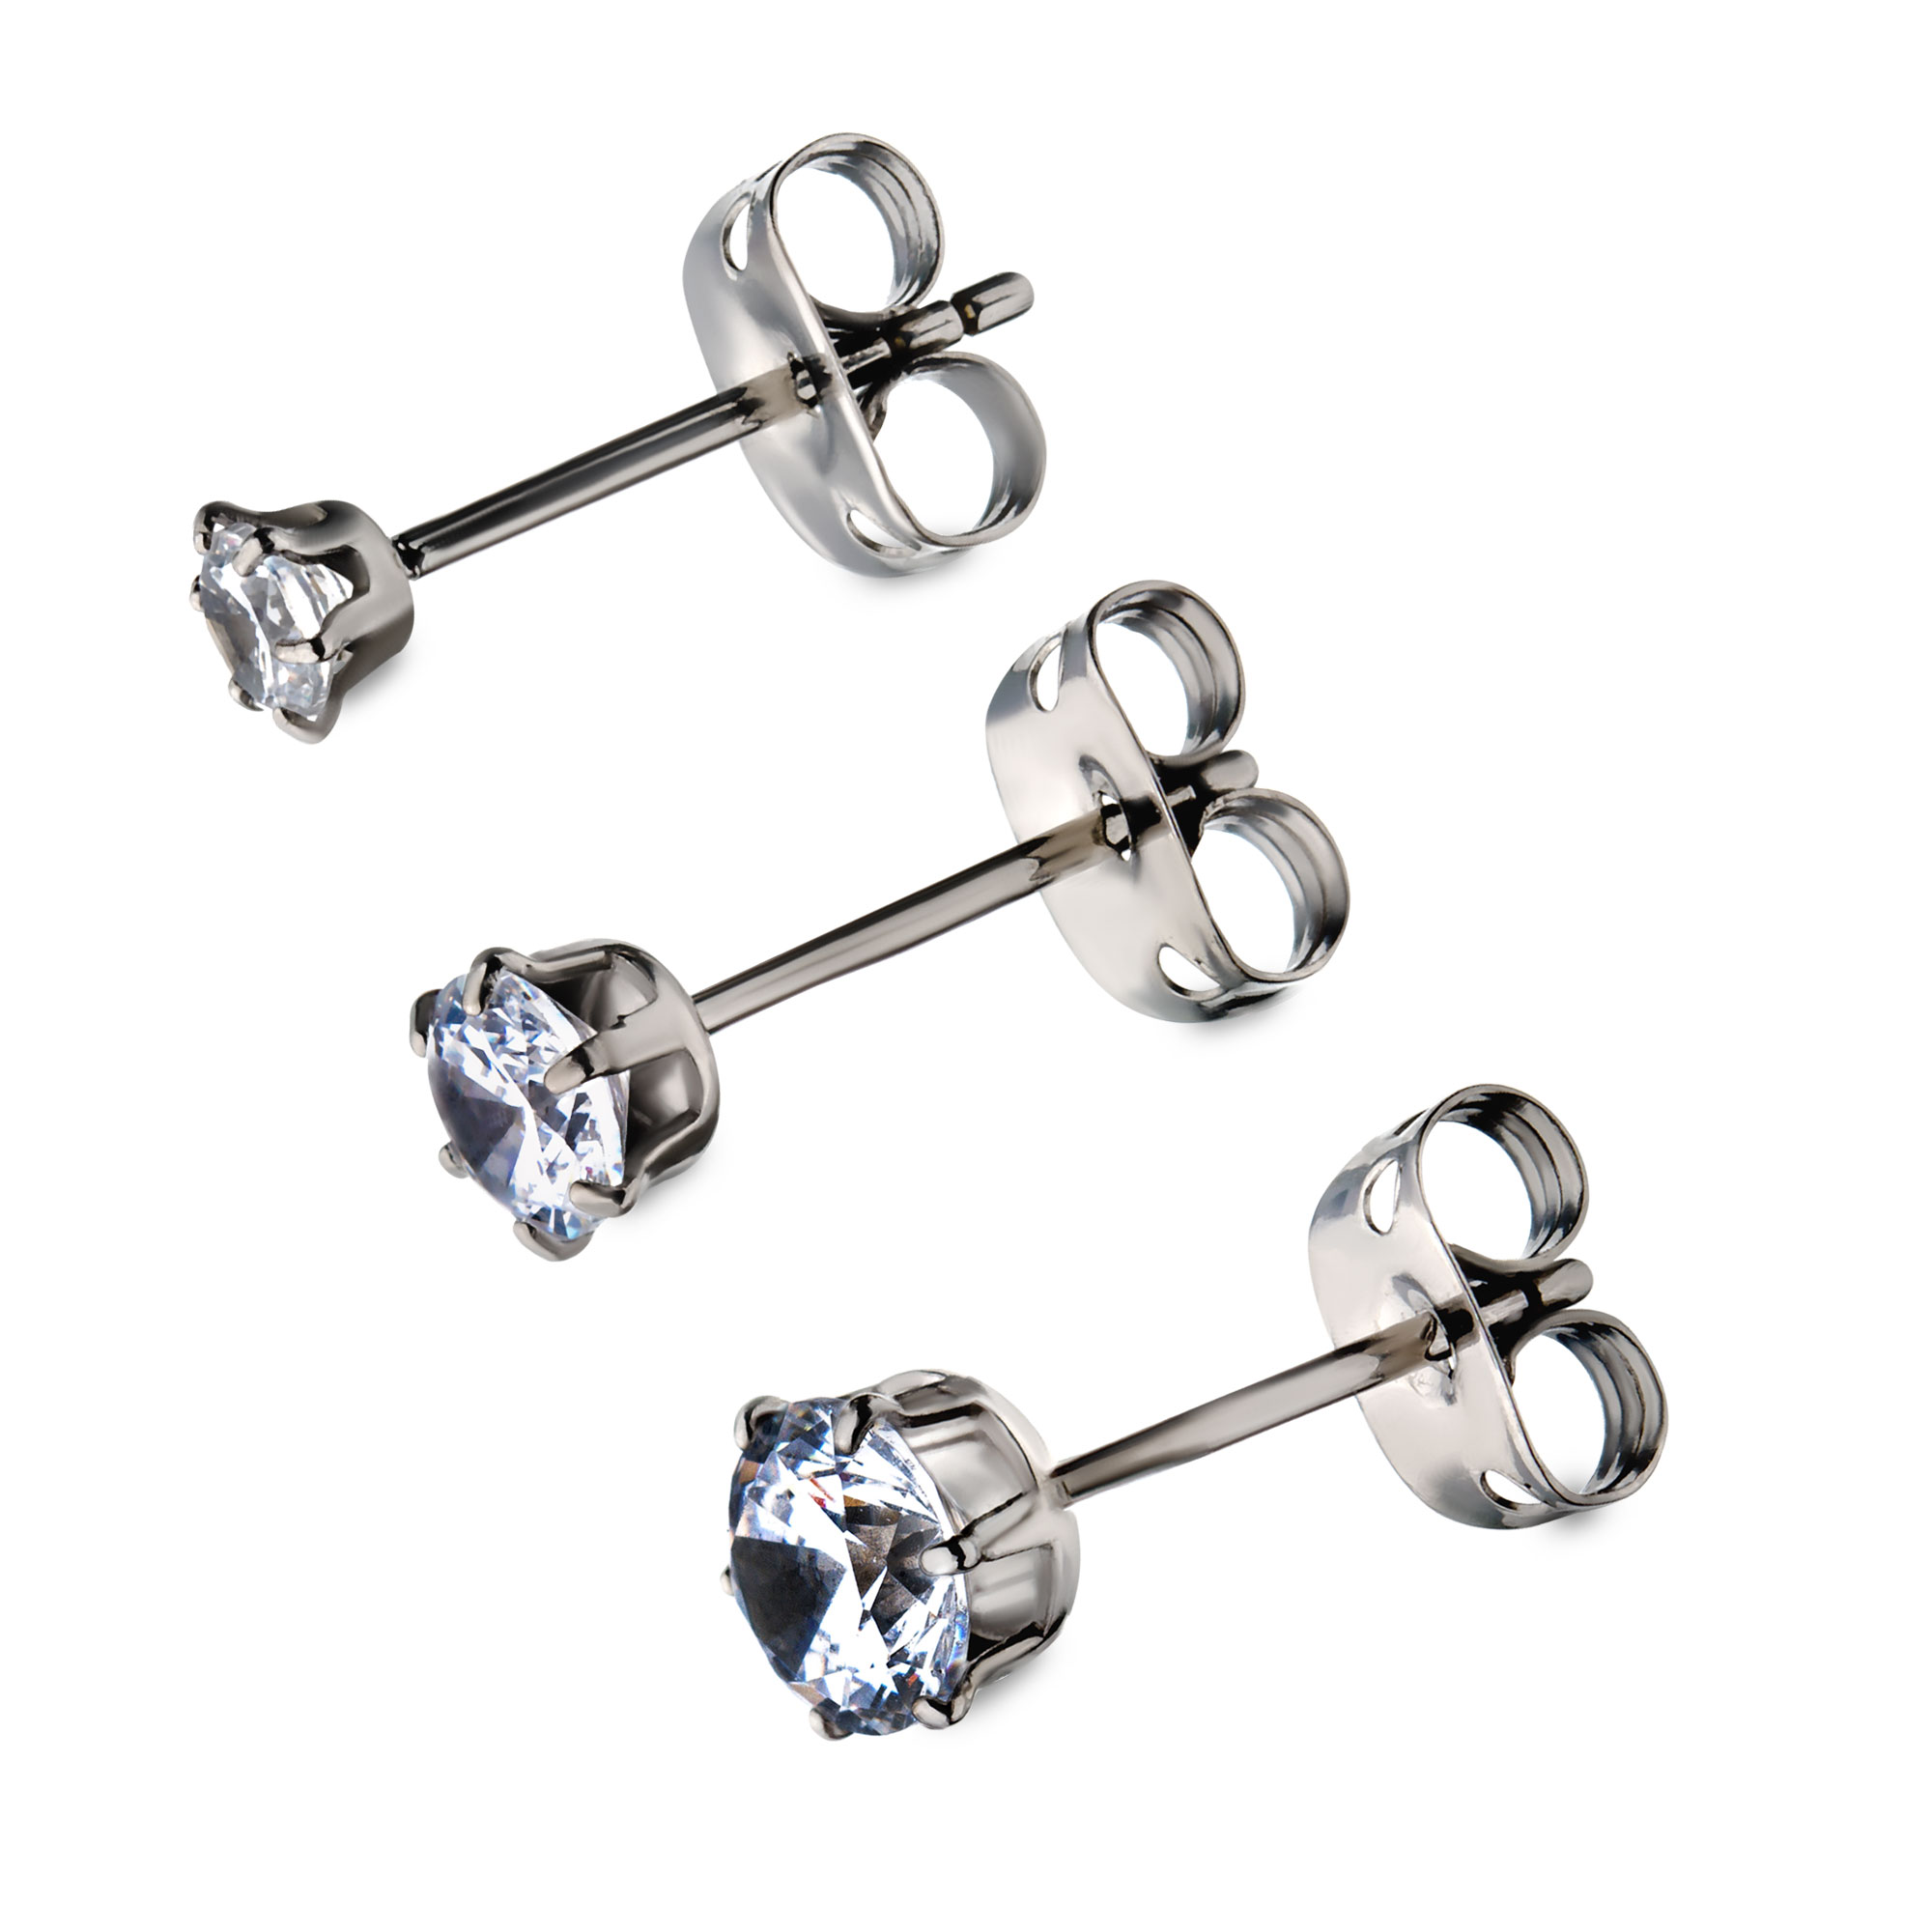 20g Titanium Post and Butterfly Back with Prong Set CZ Stud Earrings Image 2 Lewis Jewelers, Inc. Ansonia, CT